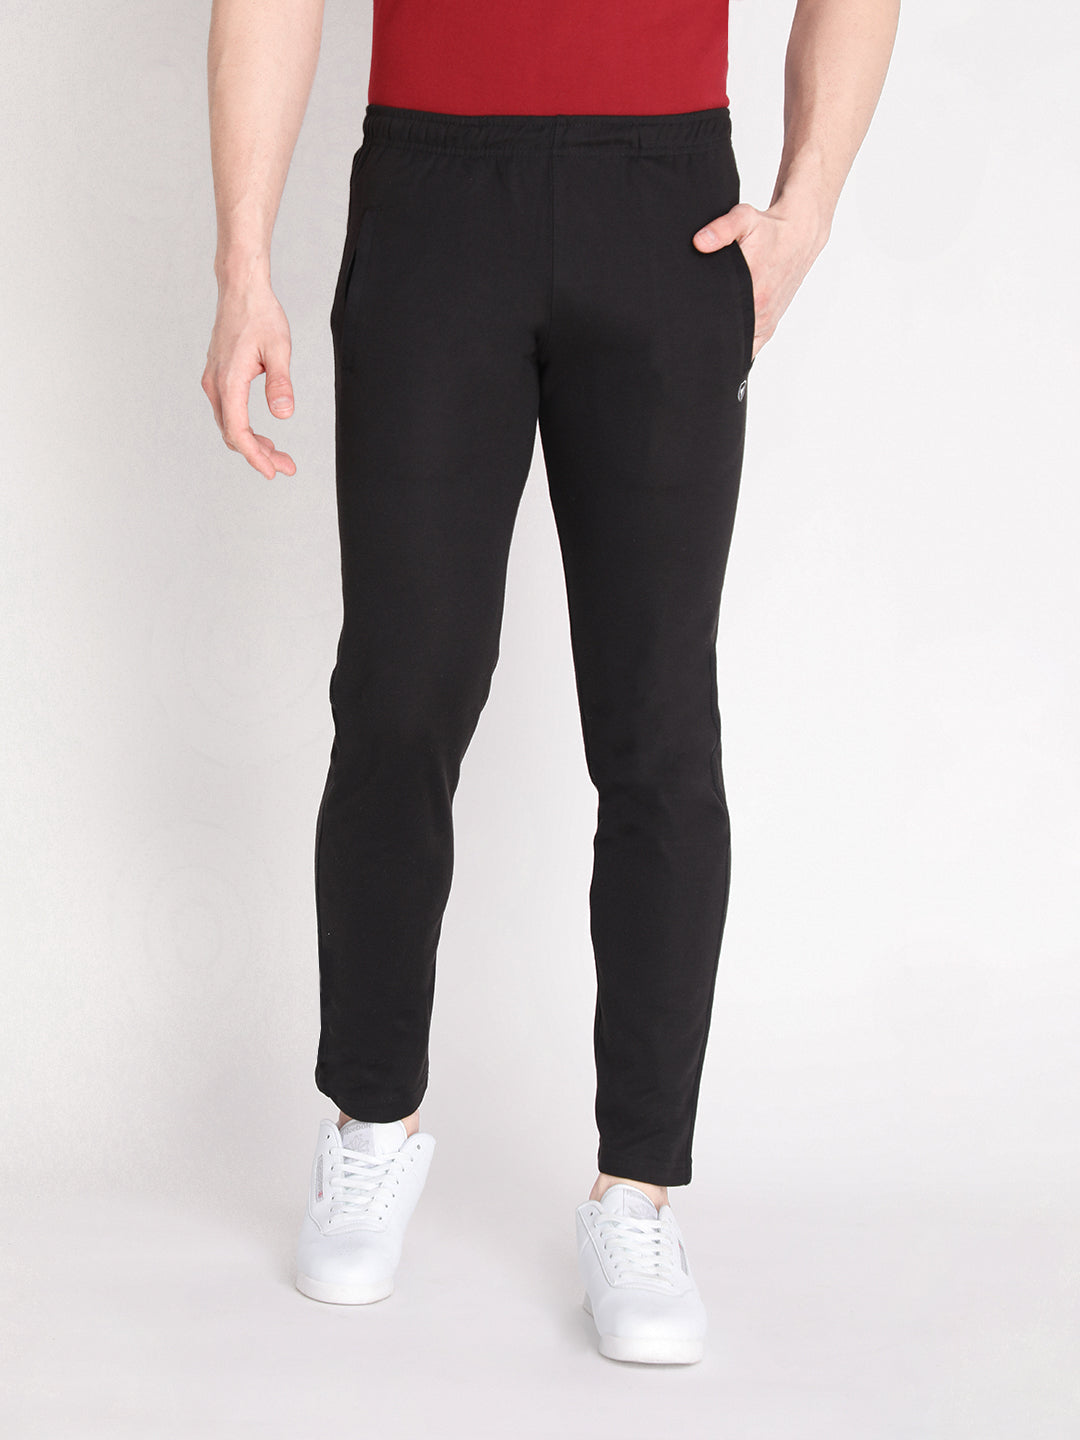 Neva Men's Trackpant with Sweat Free Fabric Material- Black